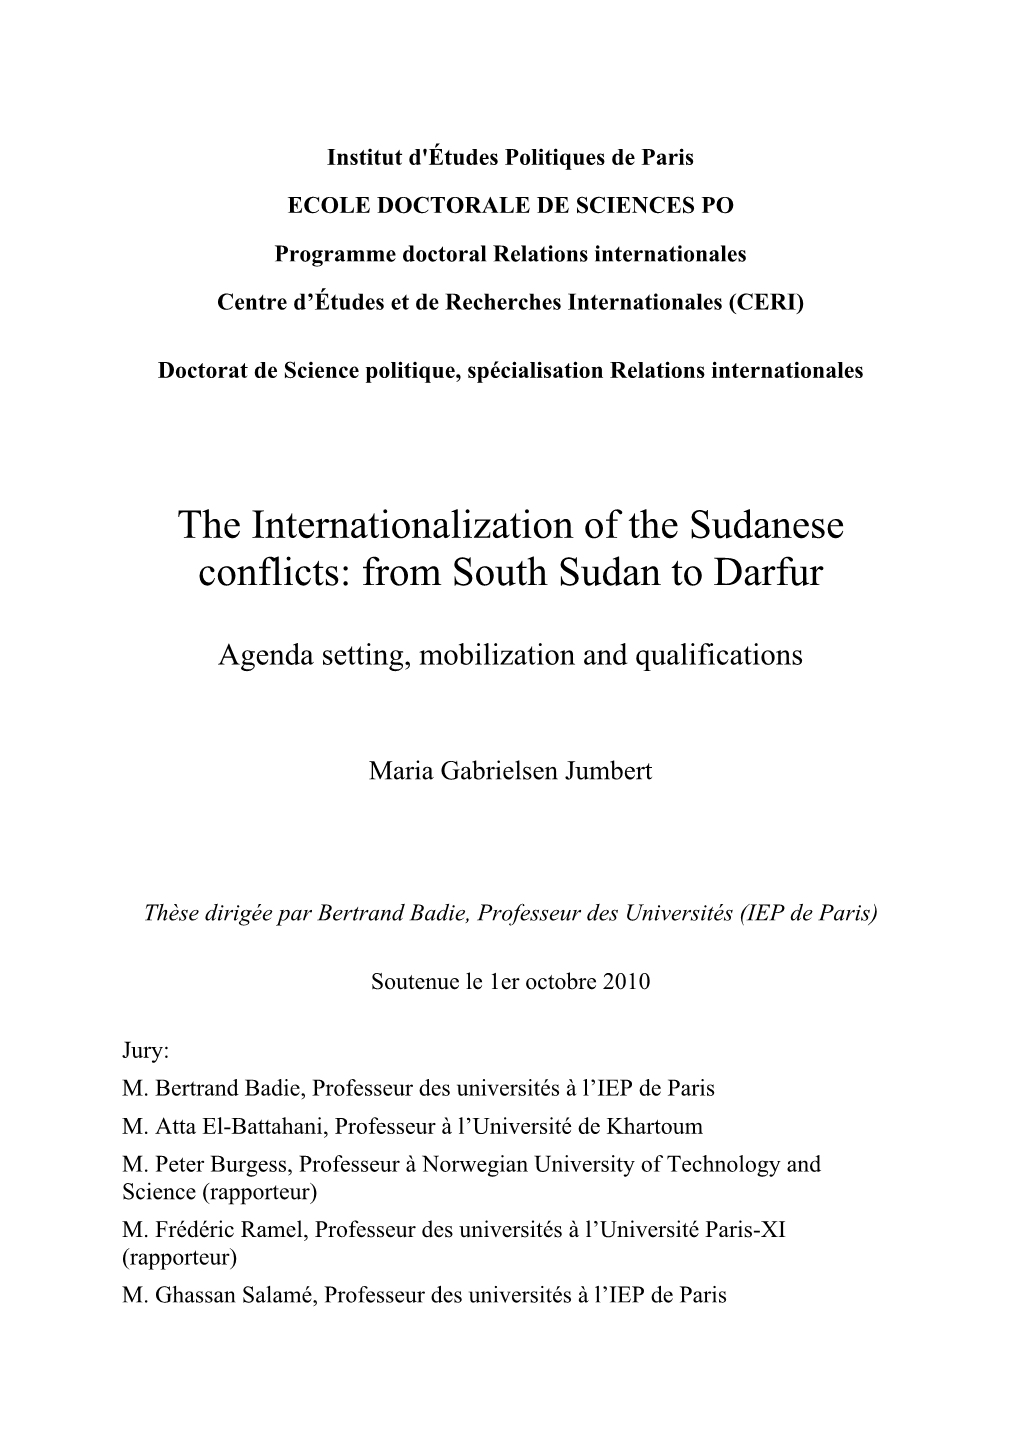 The Internationalization of the Sudanese Conflicts: from South Sudan to Darfur